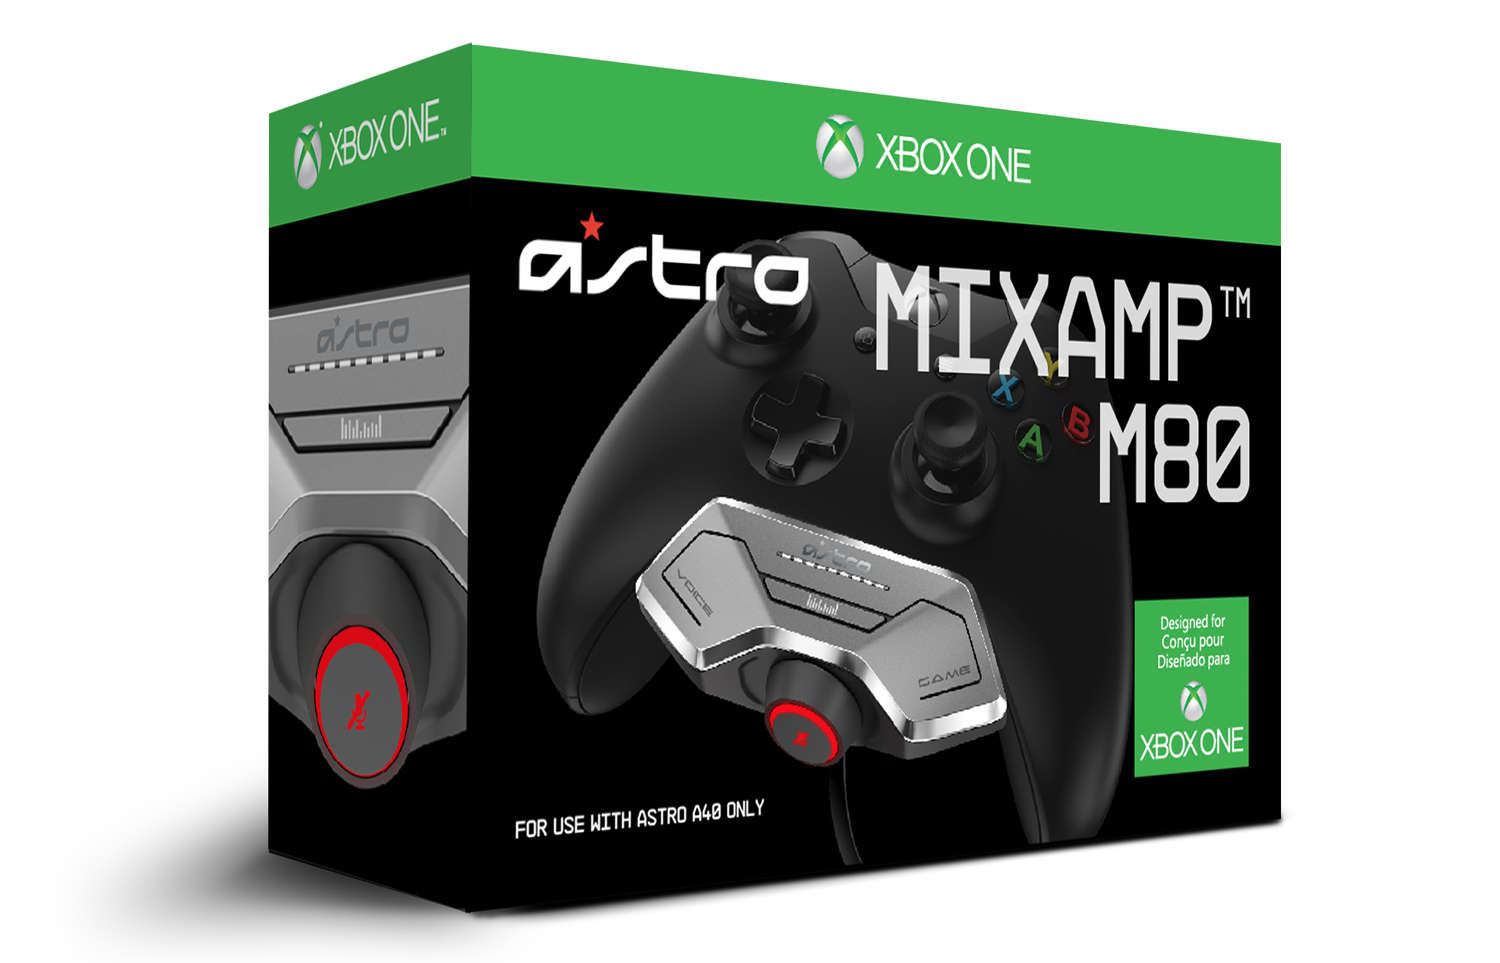 MixAmp M80 Xbox One standalone